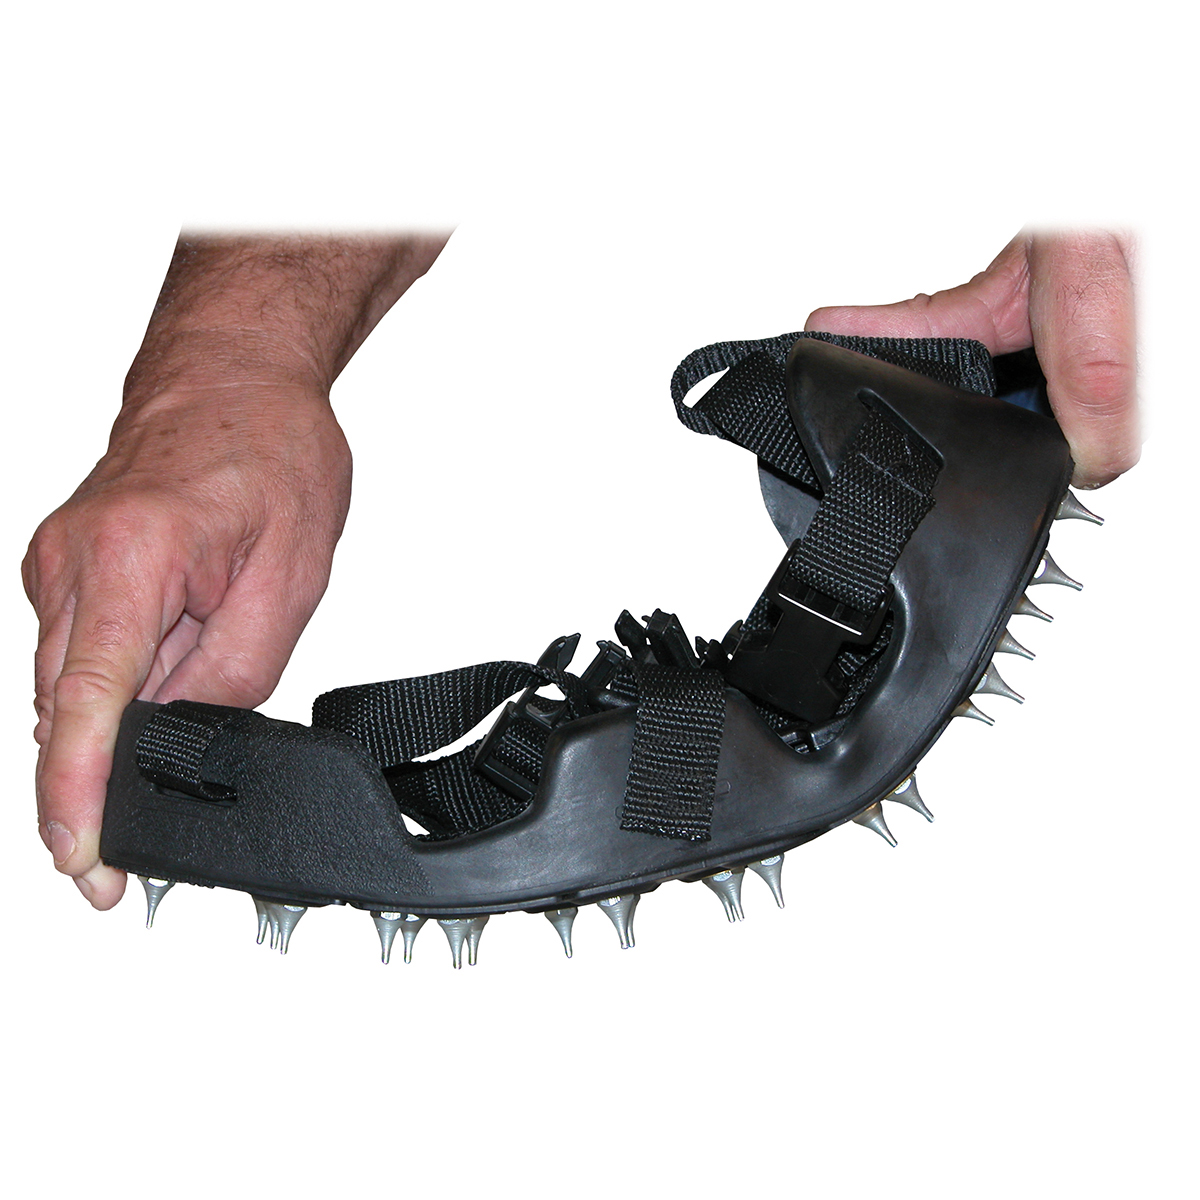 Korker's FLEXIBLE Bed Spiked Shoes - Floorguard Products, Inc.